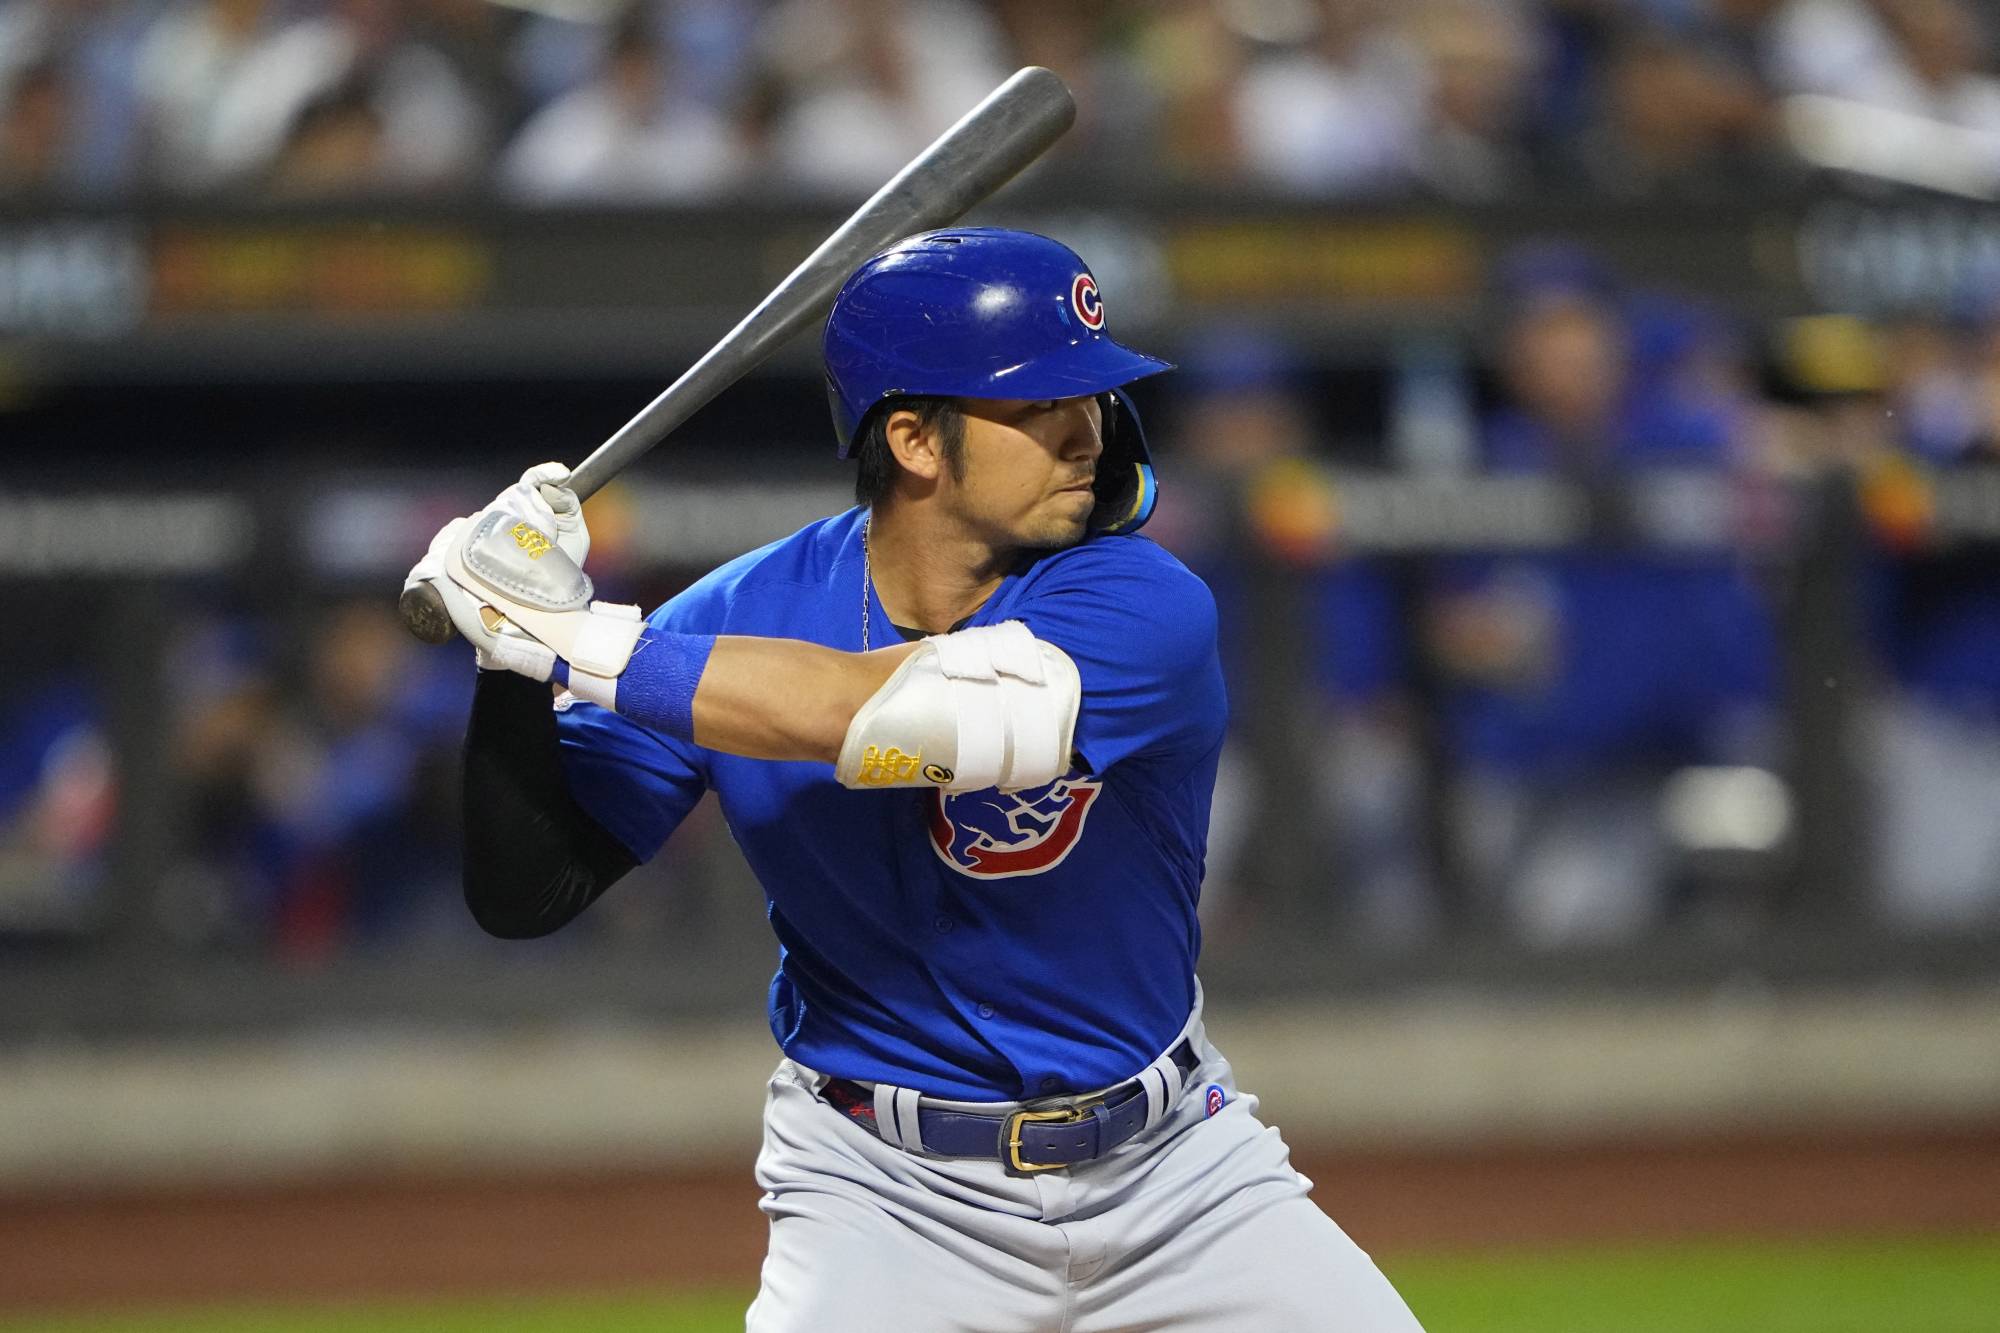 Cubs outfielder Seiya Suzuki to play for Japan in WBC - The Japan